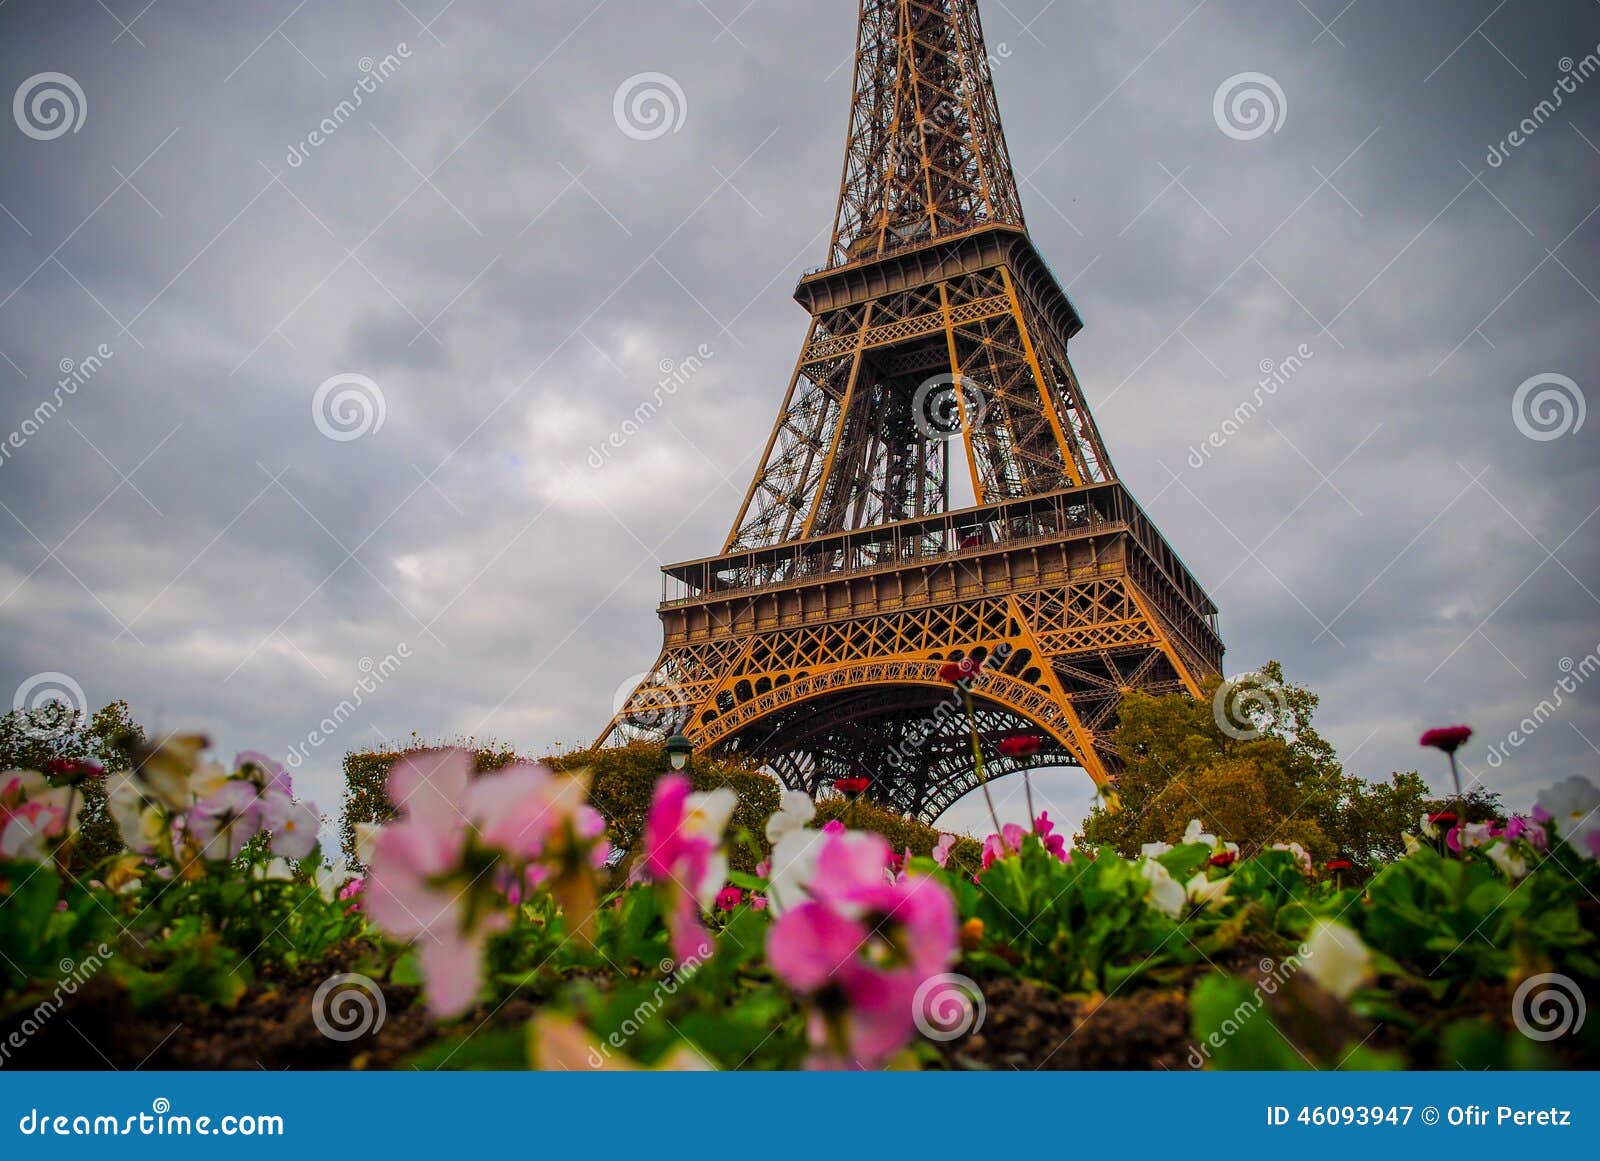 The Eiffel Tower in Paris, France during winter fall time